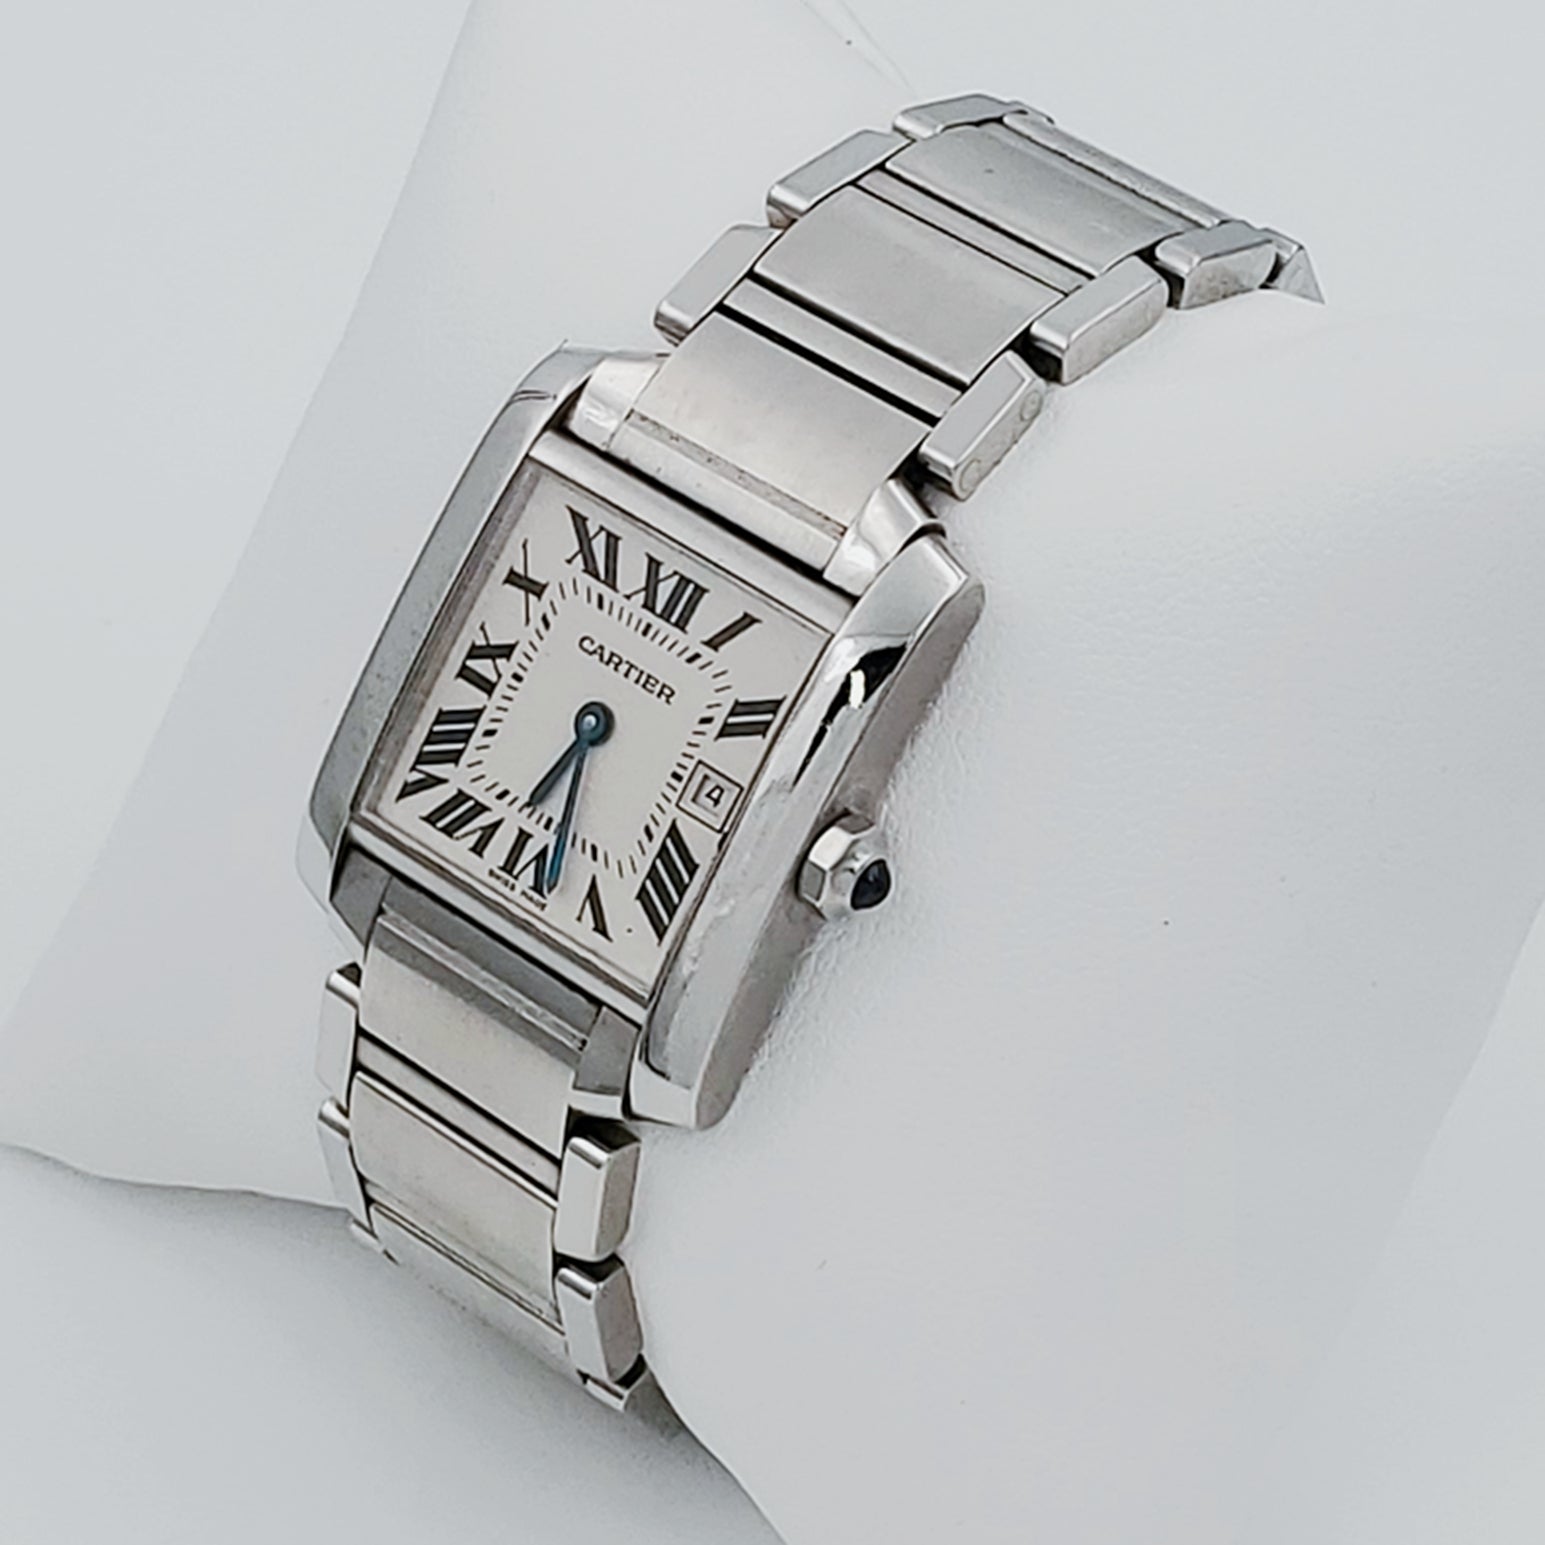 Unisex Medium Cartier Tank Francaise Watch with White Dial in Polished Finish. (Pre-Owned W51008Q3)